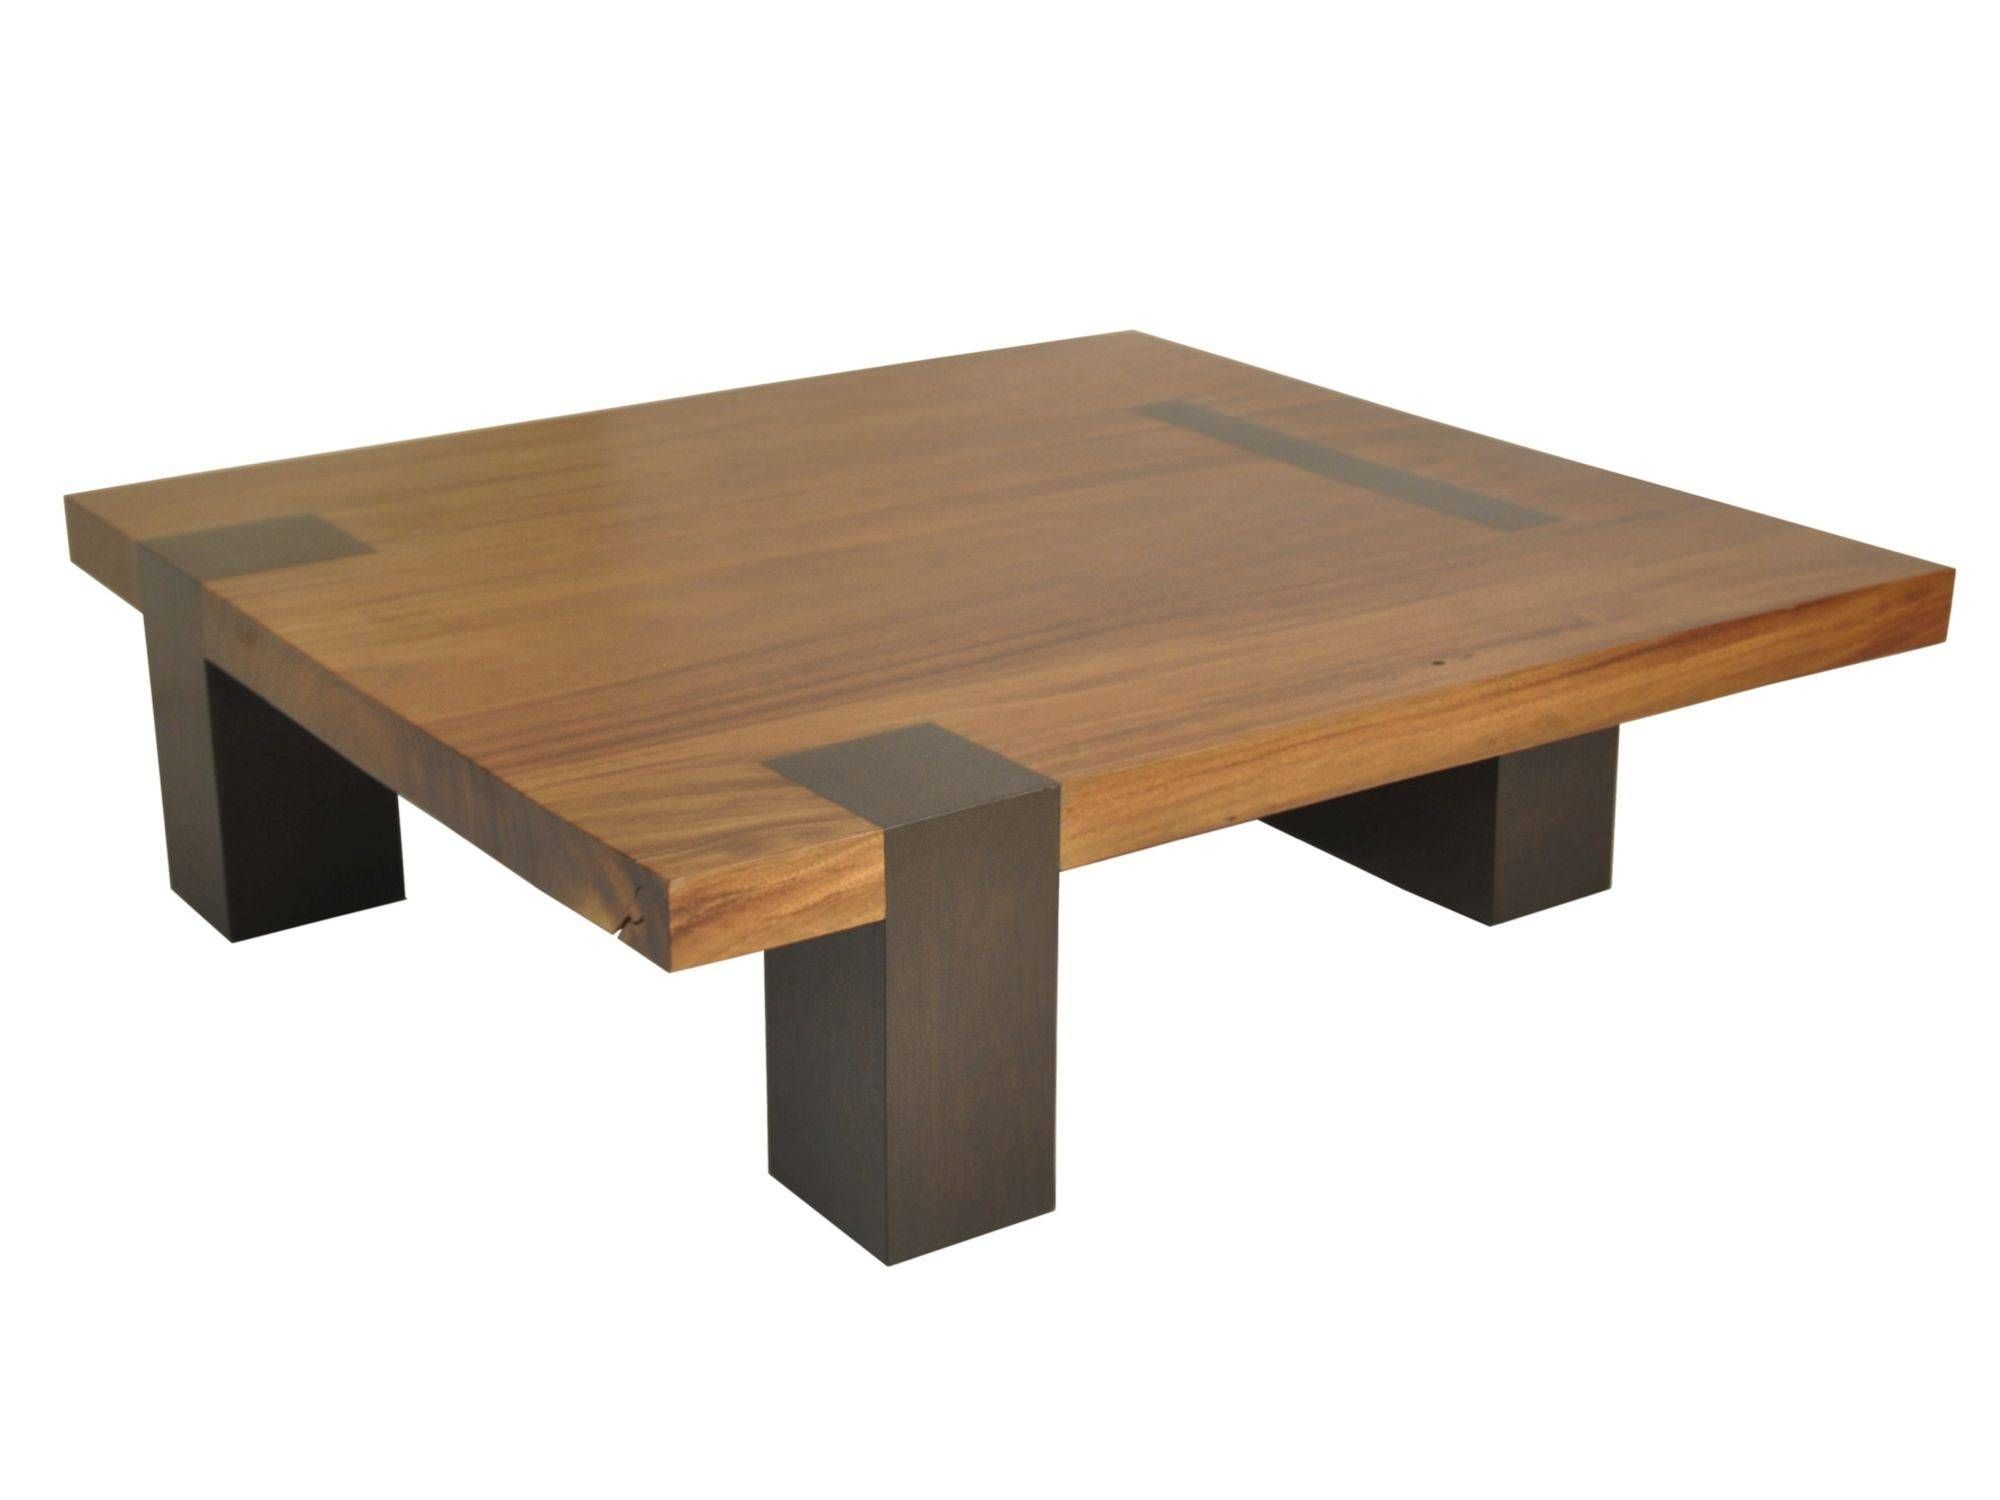 The Popularity Of The Square Wood Coffee Table Furniture With Inside Short Legs Coffee Tables (View 2 of 30)